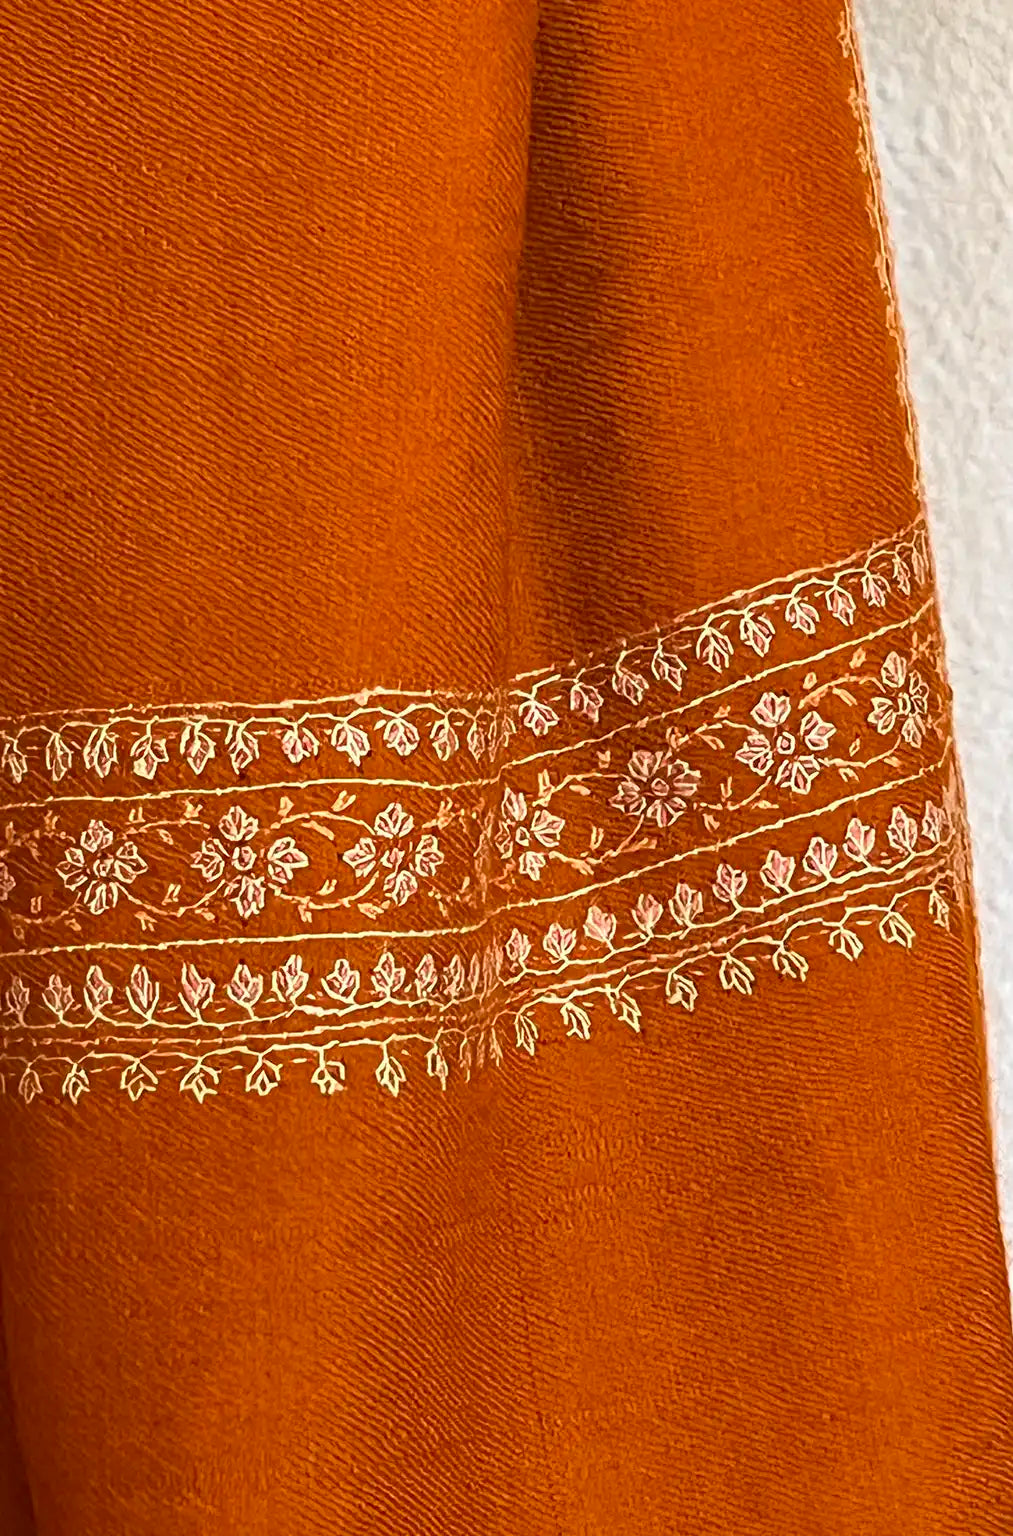 Pashmina stole in burnt orange with light border embroidery